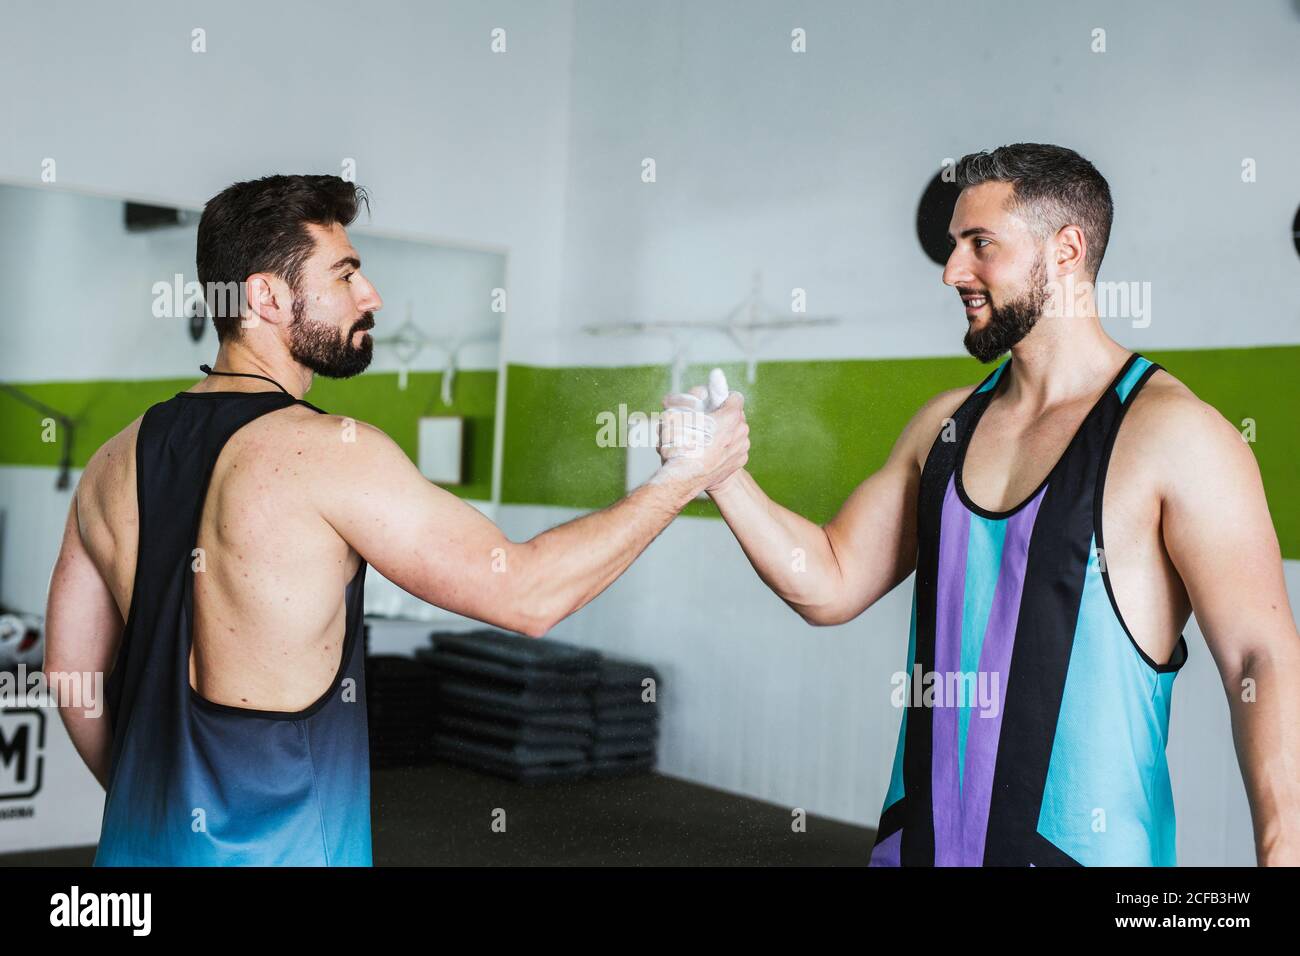 Side view of muscular competitive male bodybuilders with powdered with talcum palms greeting  each other while standing in modern gym Stock Photo